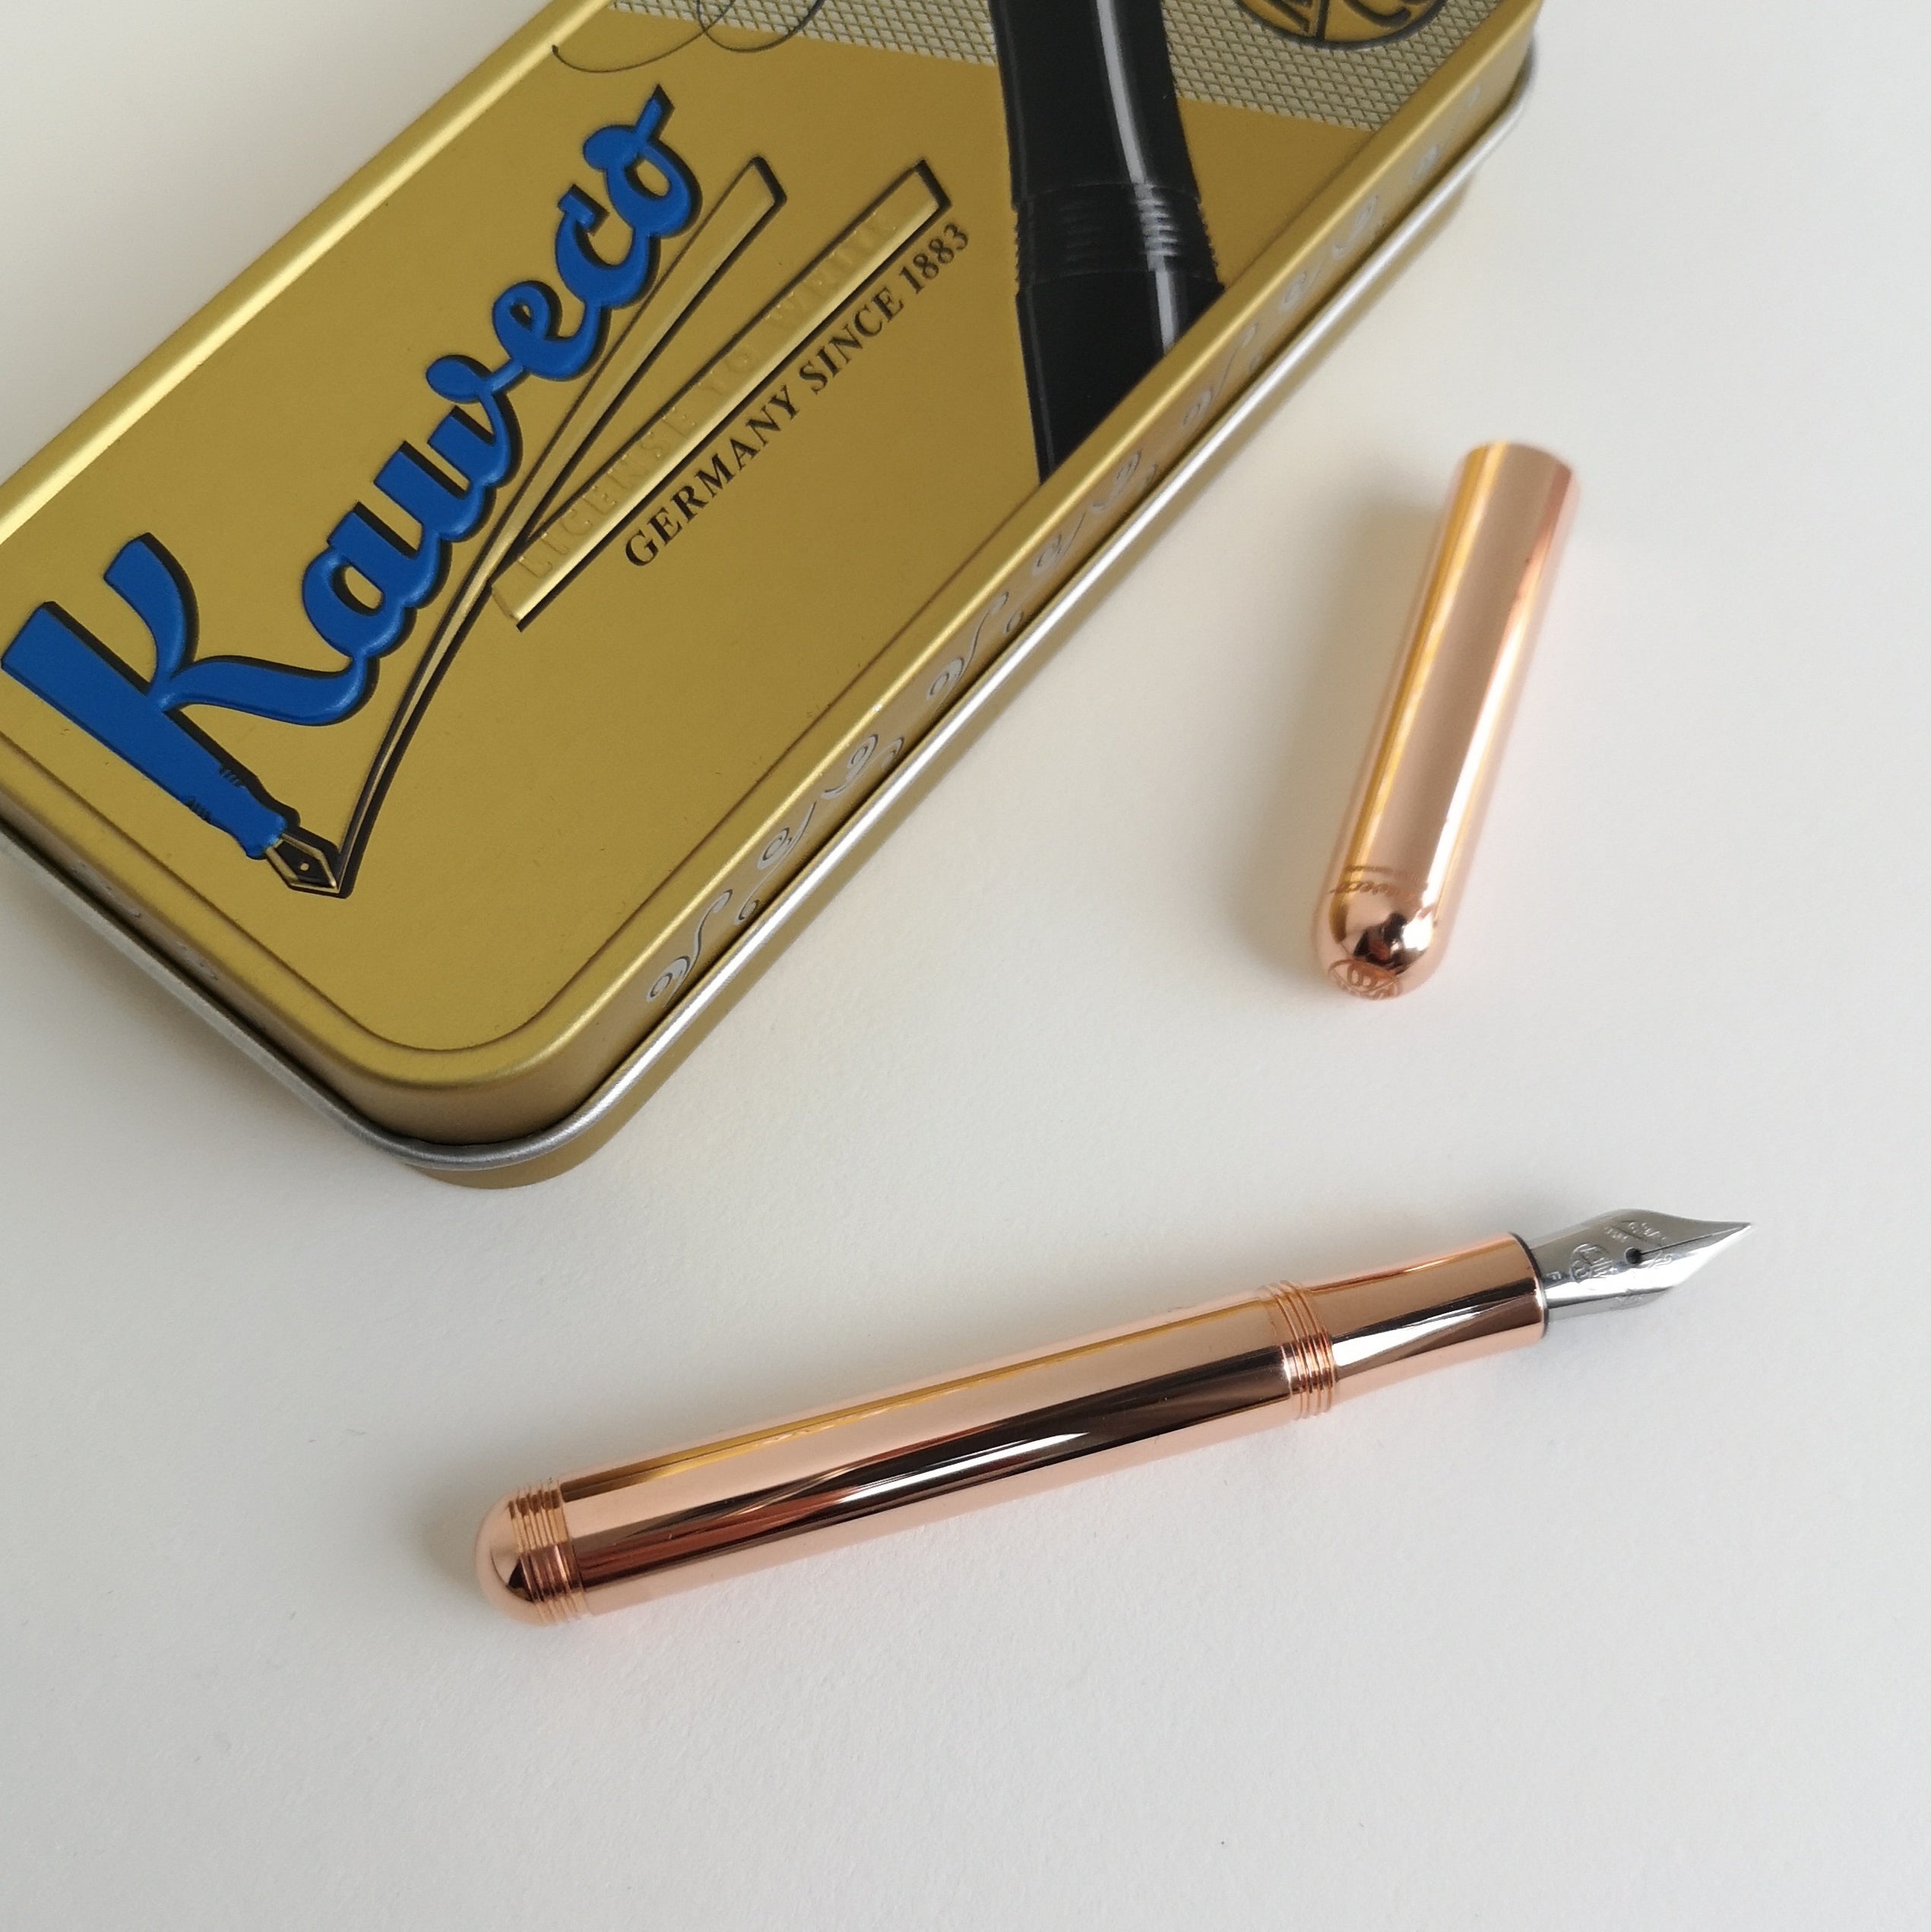 Kaweco Copper Liliput Fountain Pen with cap off and metal display tin